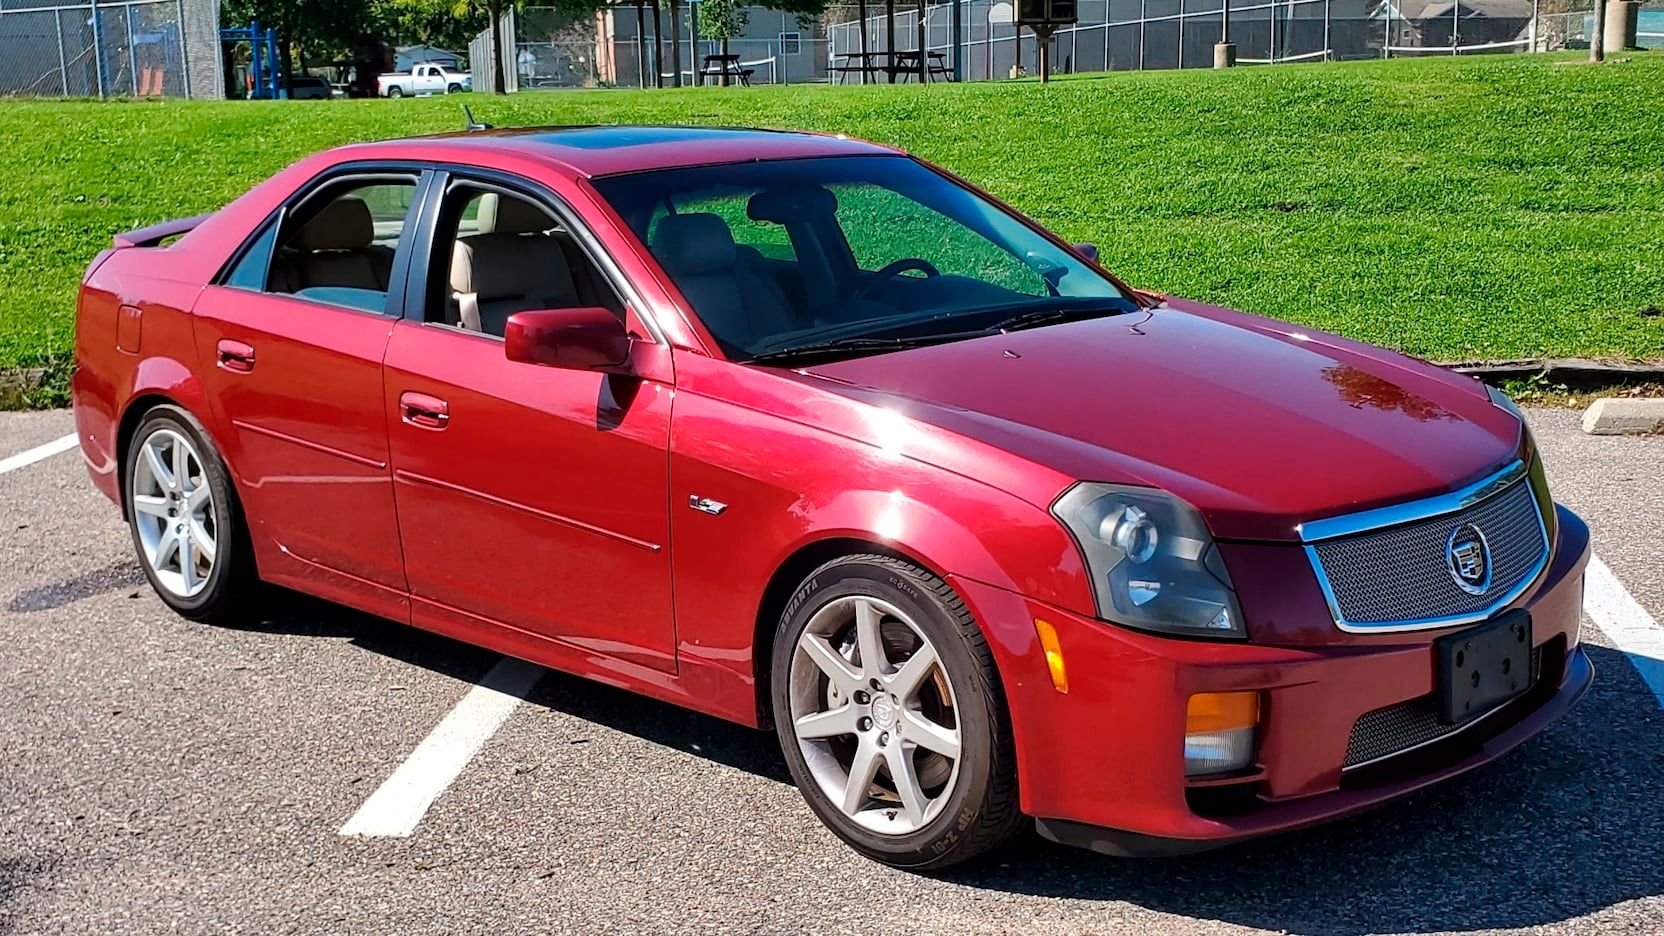 Red 2005 Cadillac CTS-V parked